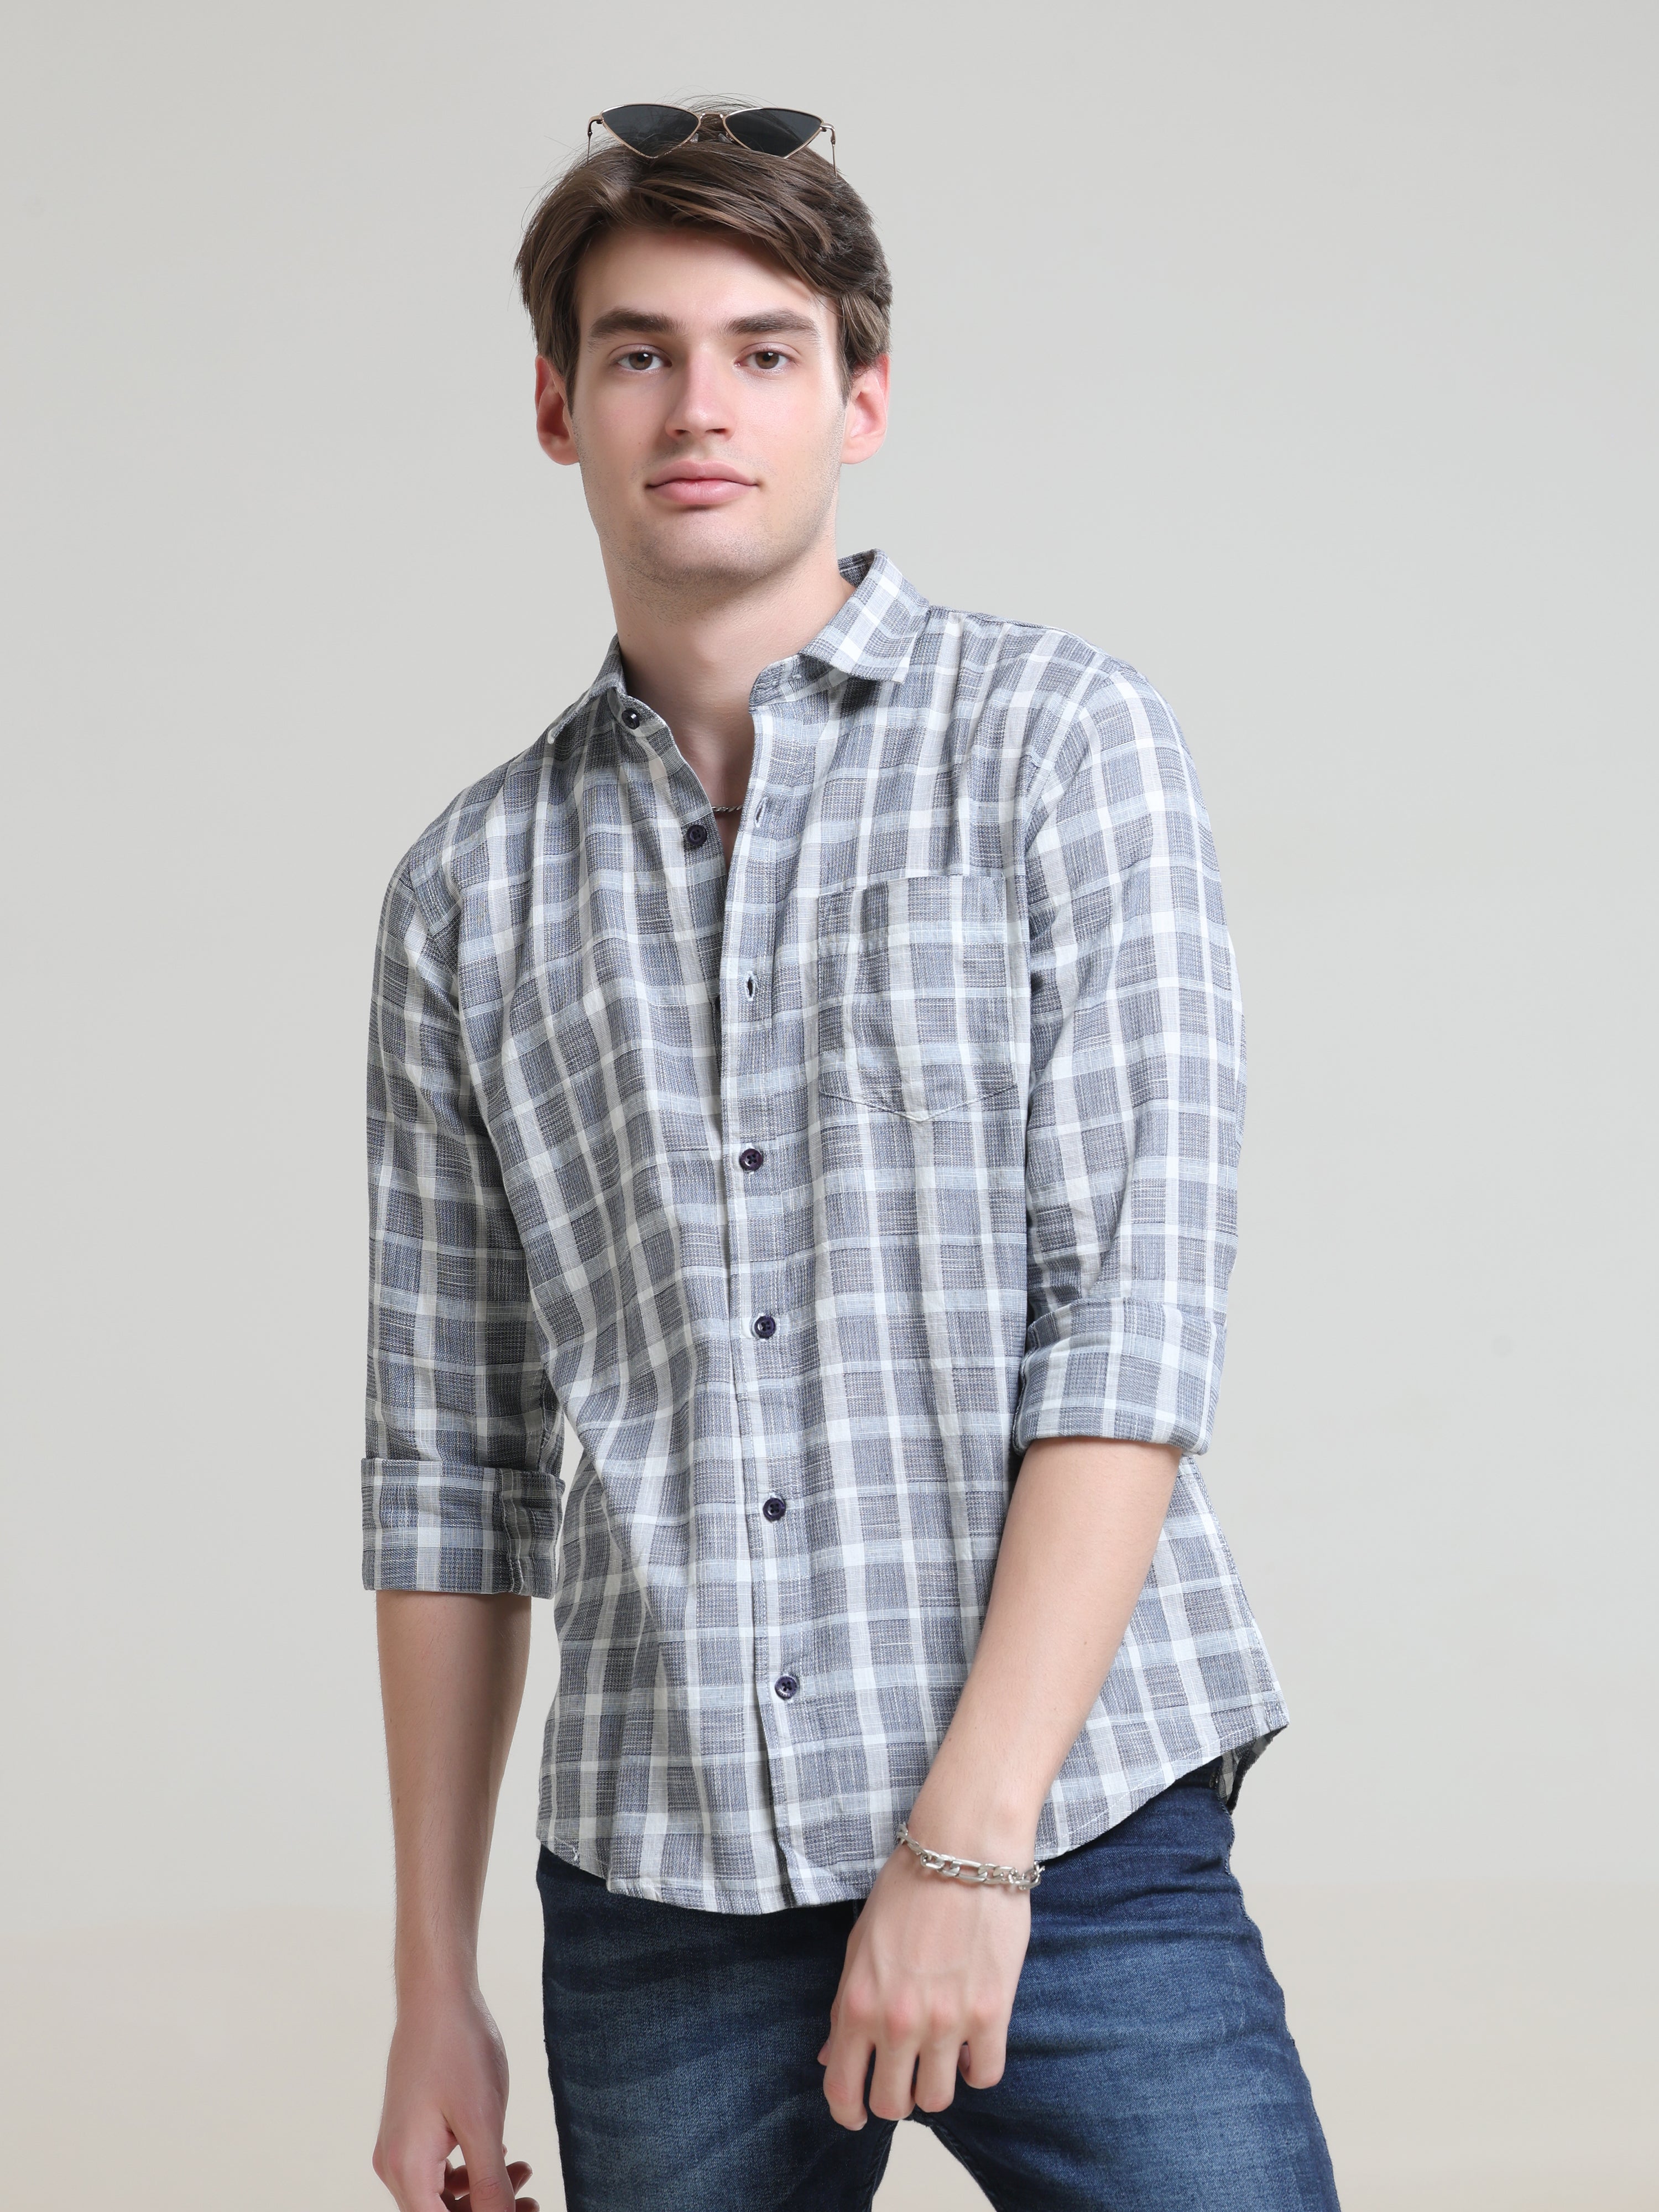 Shop Stylish Grey Check Shirt for Men Online at Great PriceRs. 1299.00